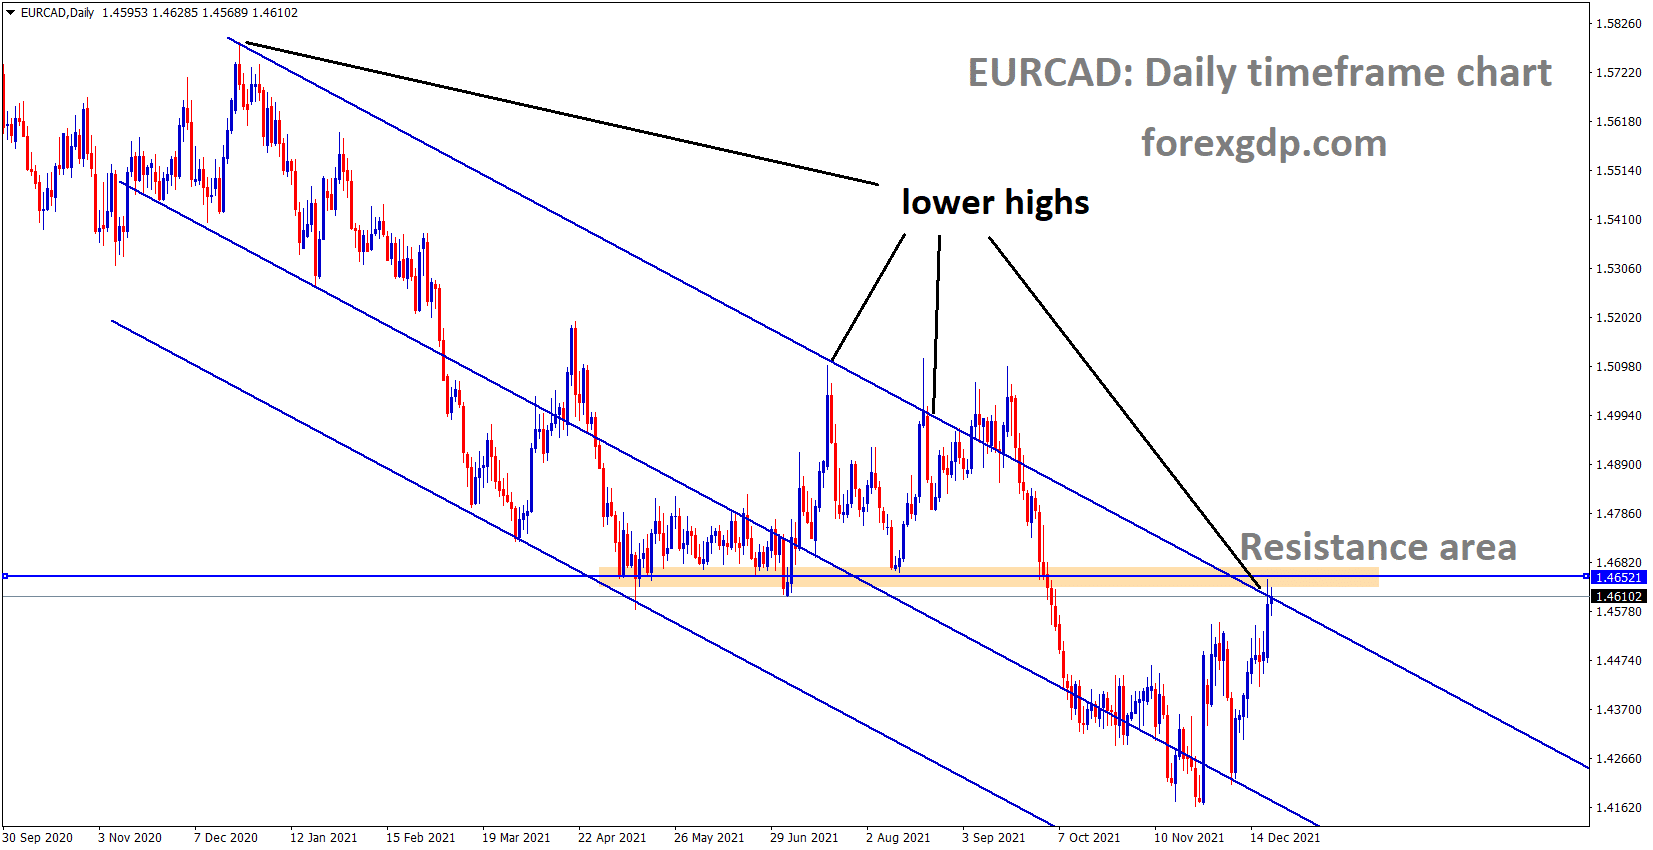 EURCAD is moving the Descending channel and the market reached the horizontal resistance area and lower high area of the channel